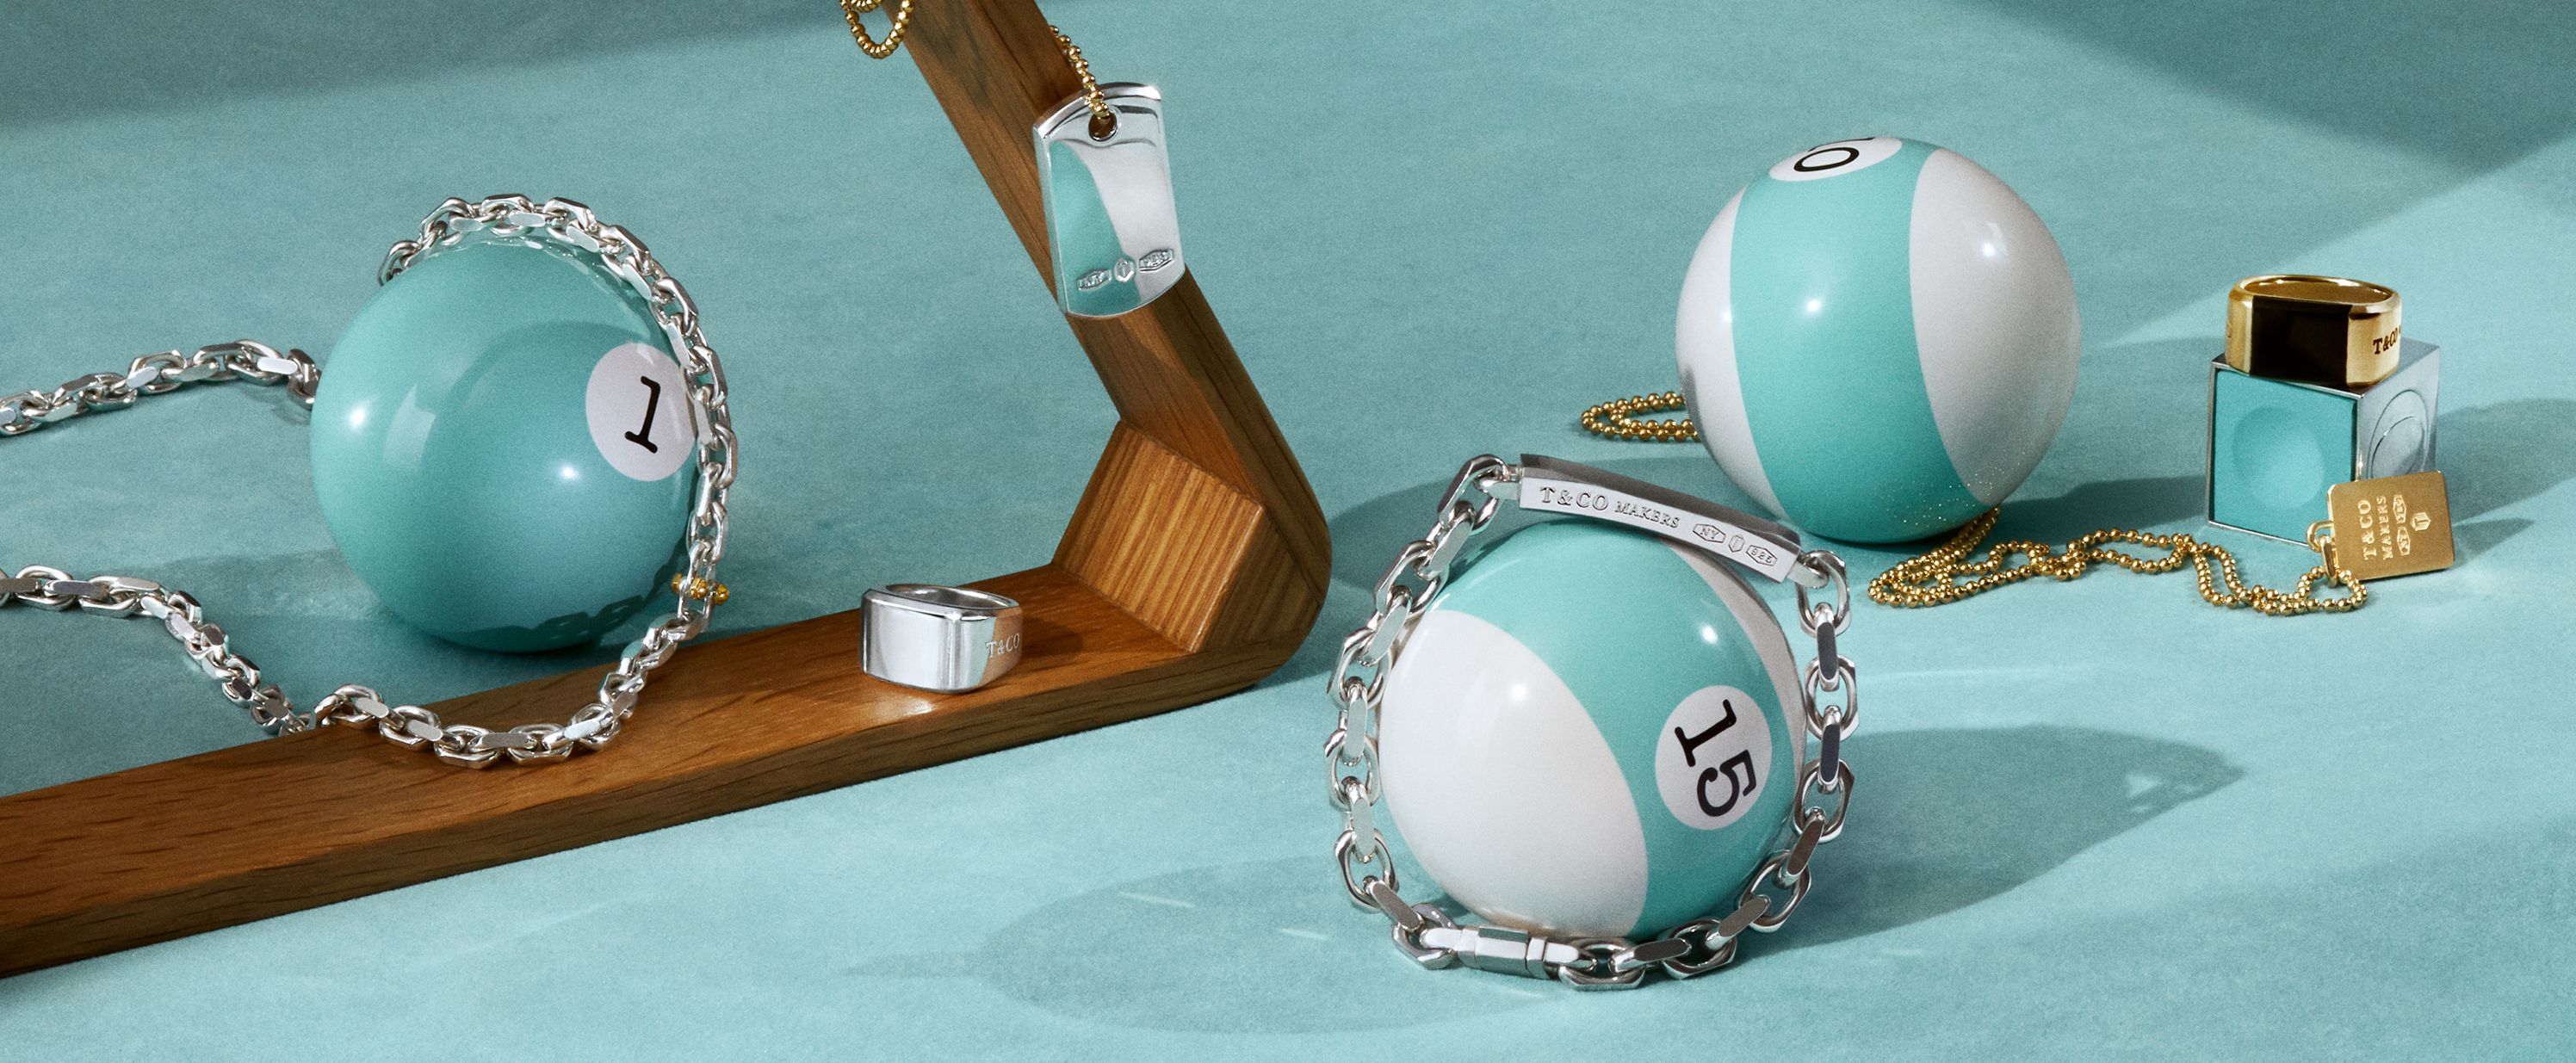 Tiffany & Co's collections